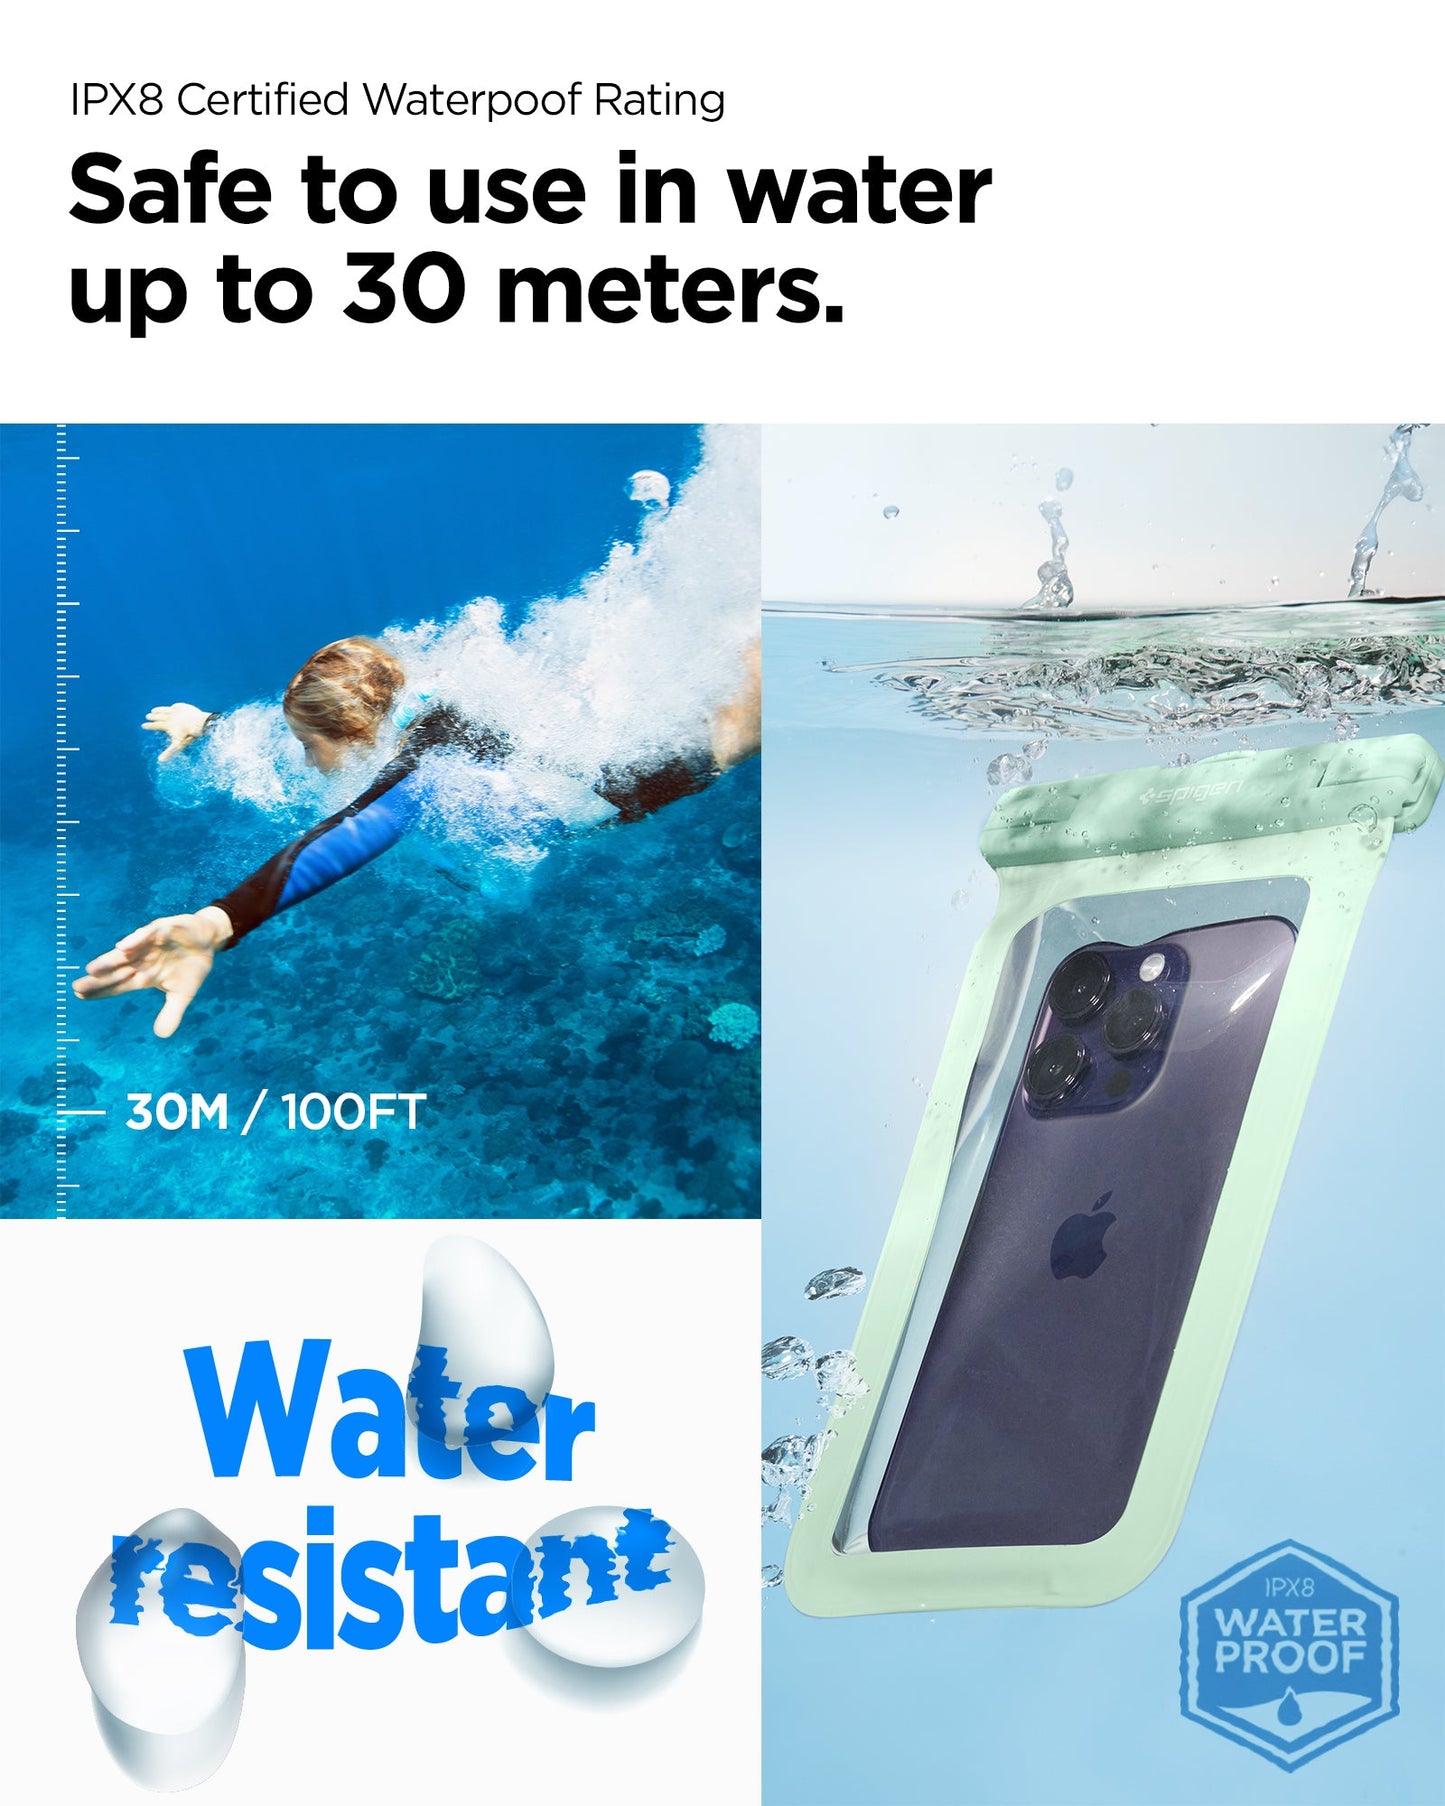 ACS06015 - AquaShield Waterproof Case (2 Pack) A601 in Mint showing the IPX8 Certified Waterproof Rating, safe to use in water up to 30M/100FT water resistant